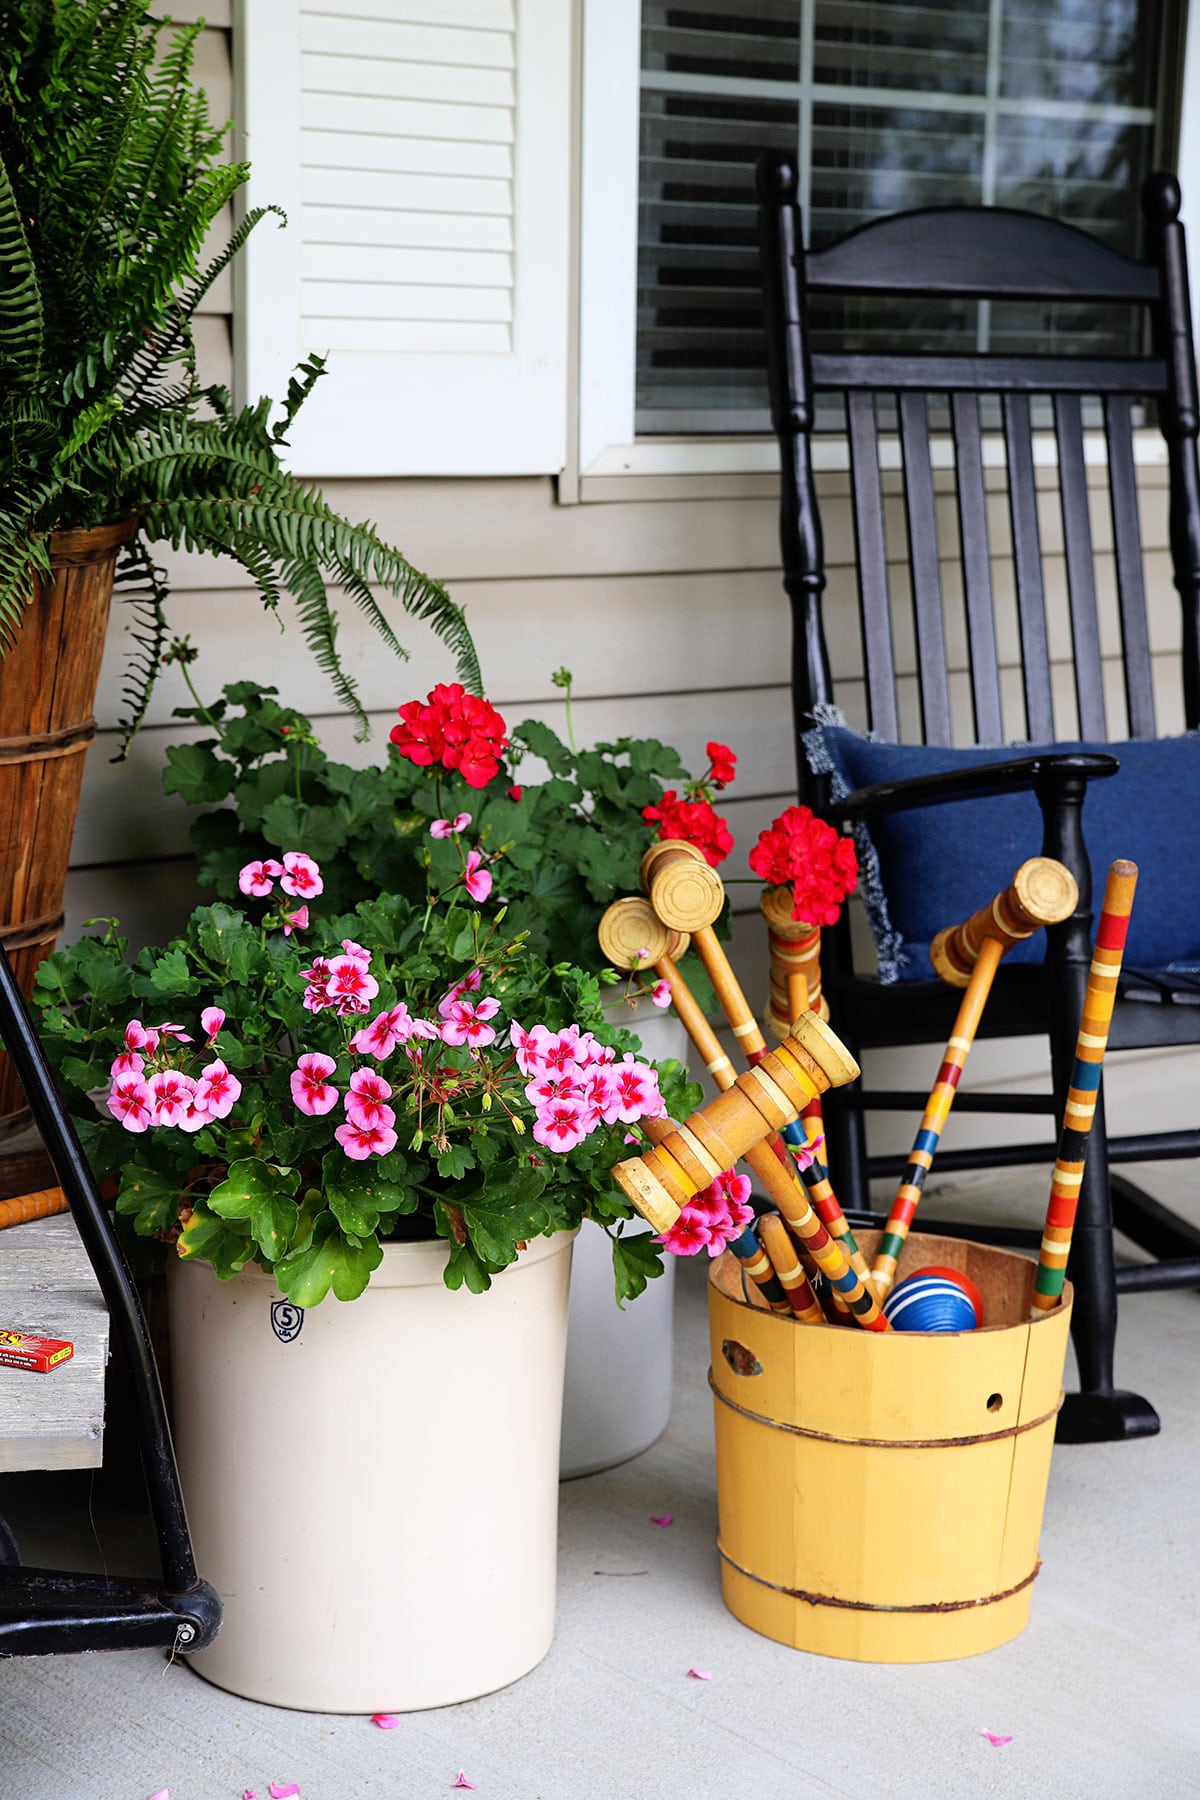 Geraniums planted in crocks on the front porch. Croquet set in a yellow ice cream churn to the side. 